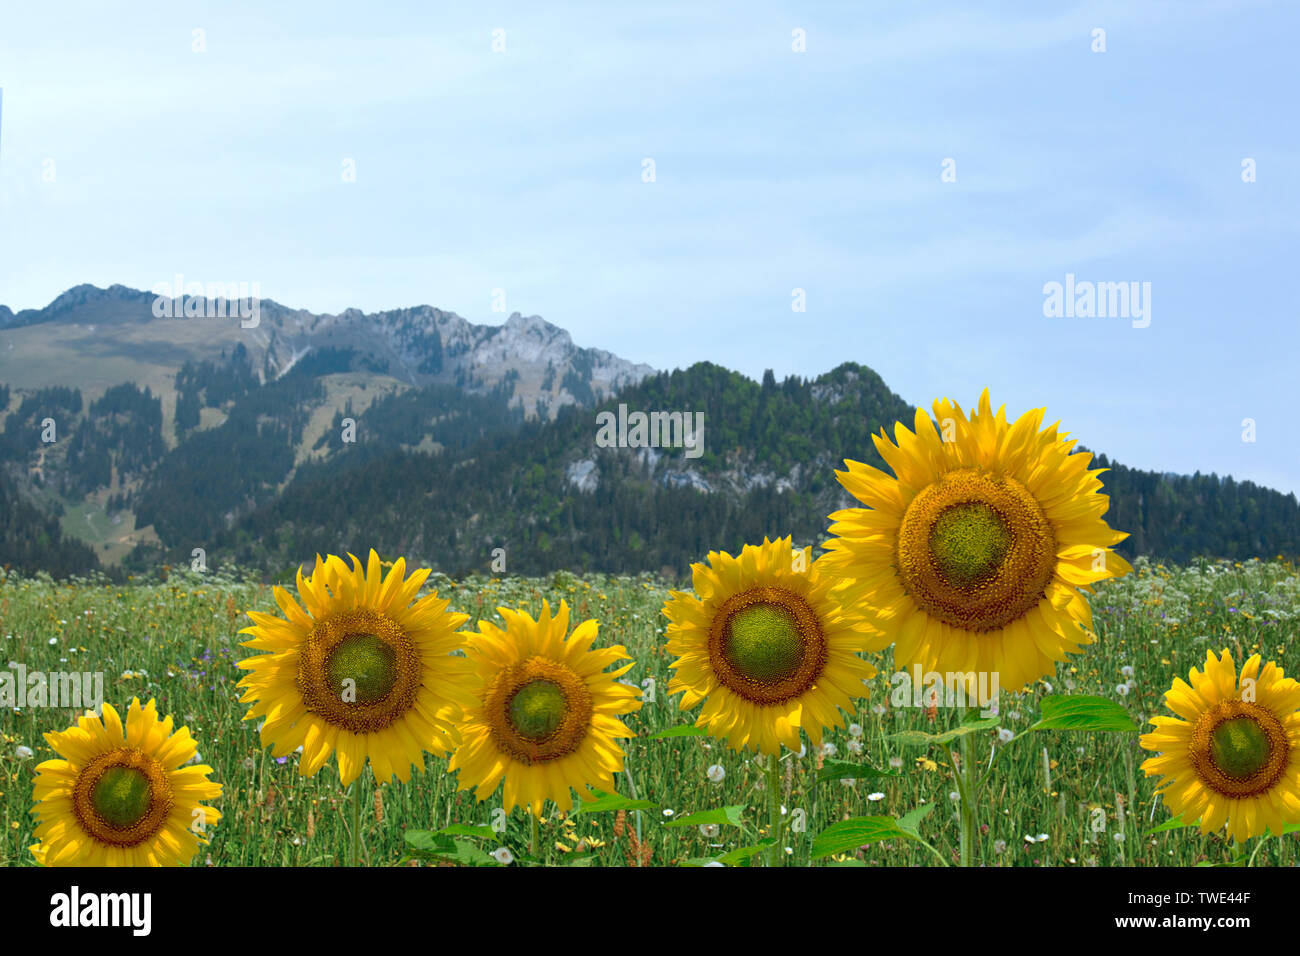 Sunflowers (Helianthus annuus) in a field Stock Photo